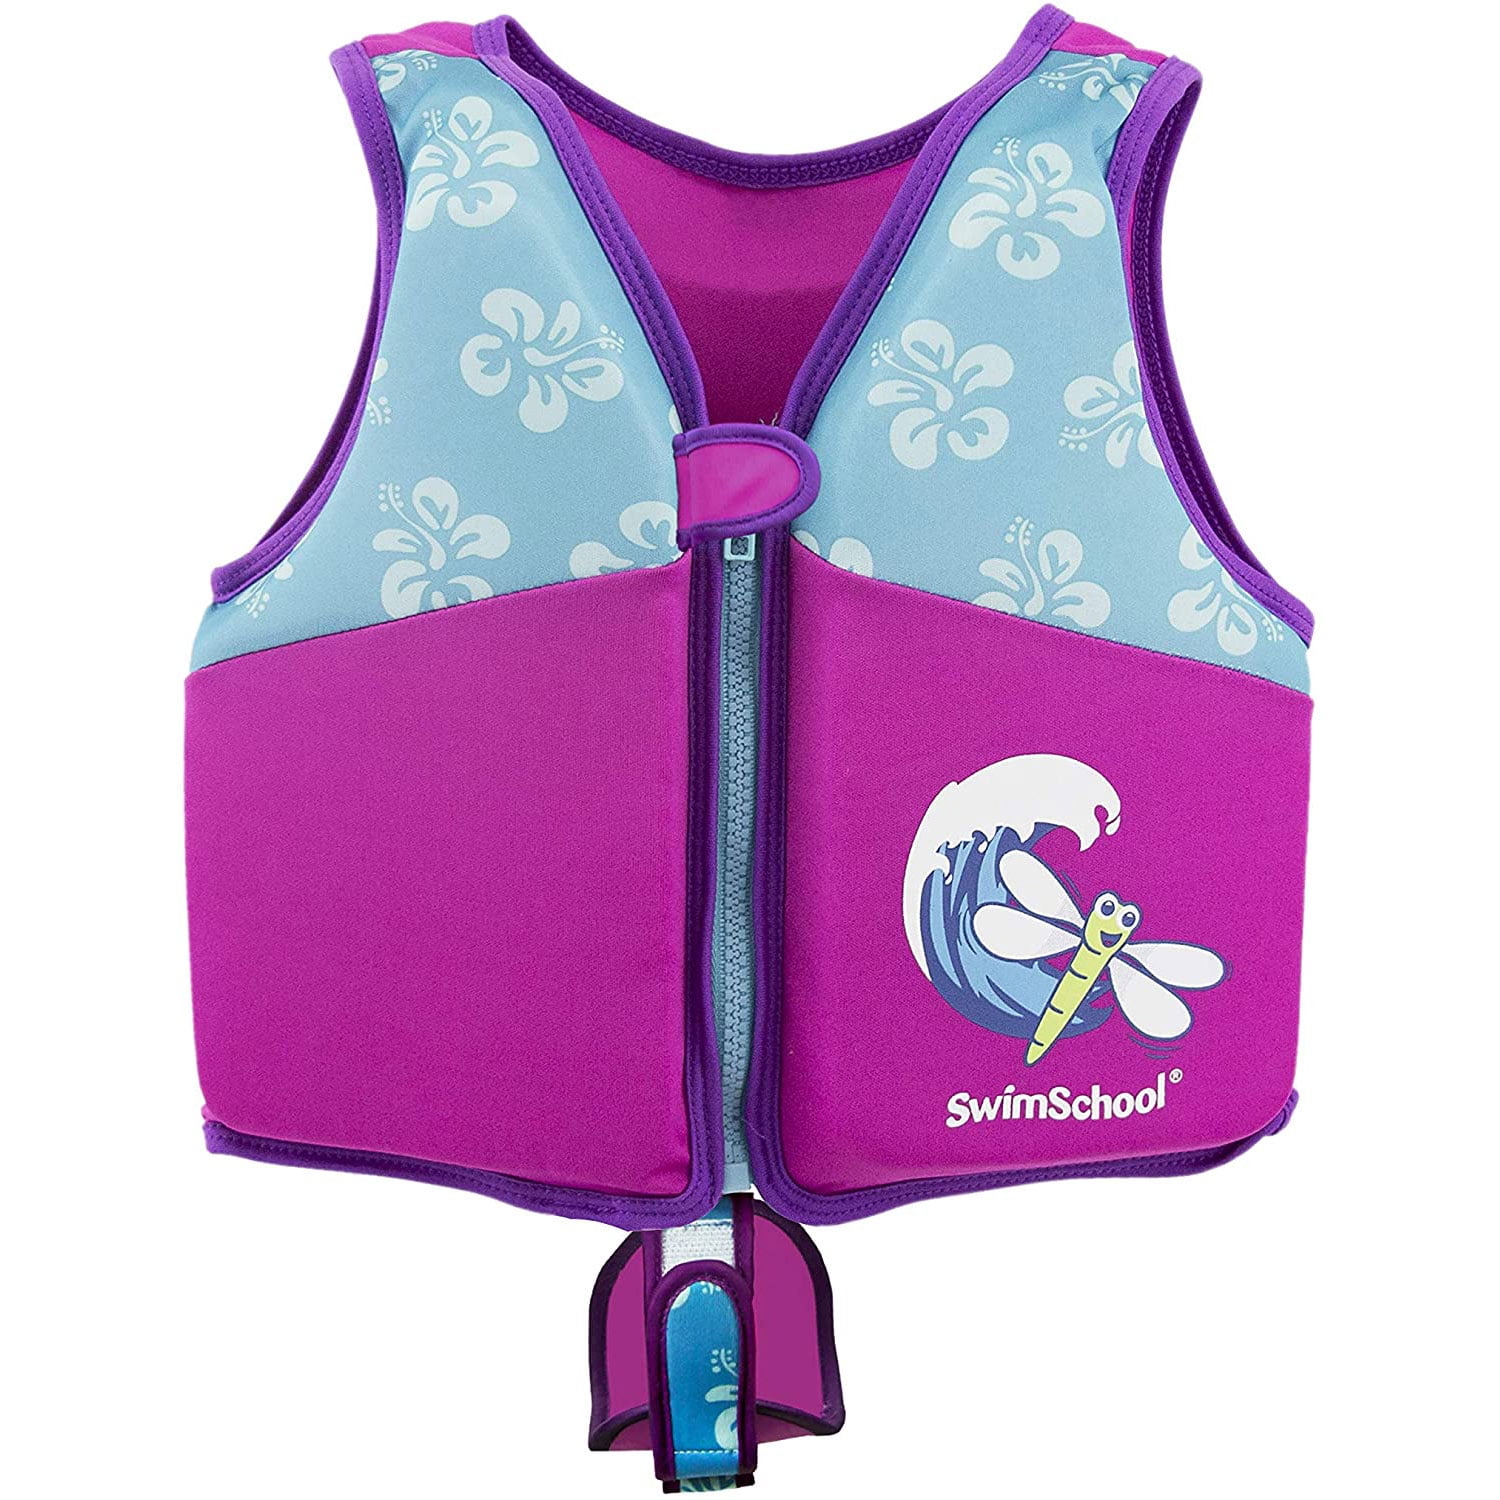 Padded Shoulders and Adjustable Safety Strap Easy On & Off Medium/Large SwimSchool New & Improved Swim Trainer Vest Up to 50 Lbs. AZV18861ML-Parent Pink/Aqua Flex-Form Design 